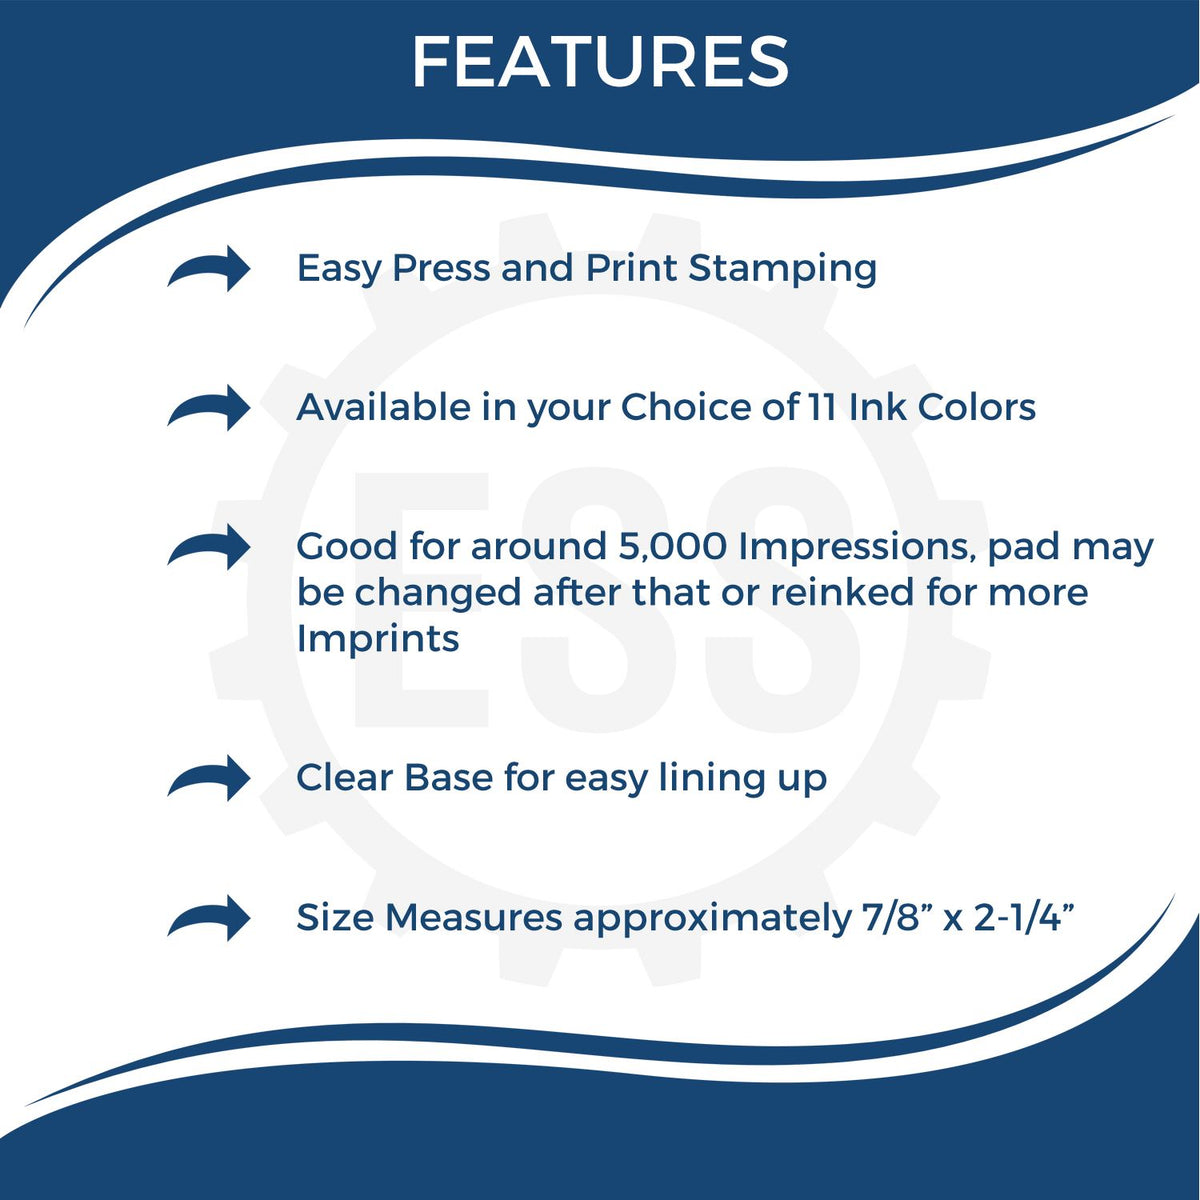 Large Self Inking Covid-19 Patient Stamp